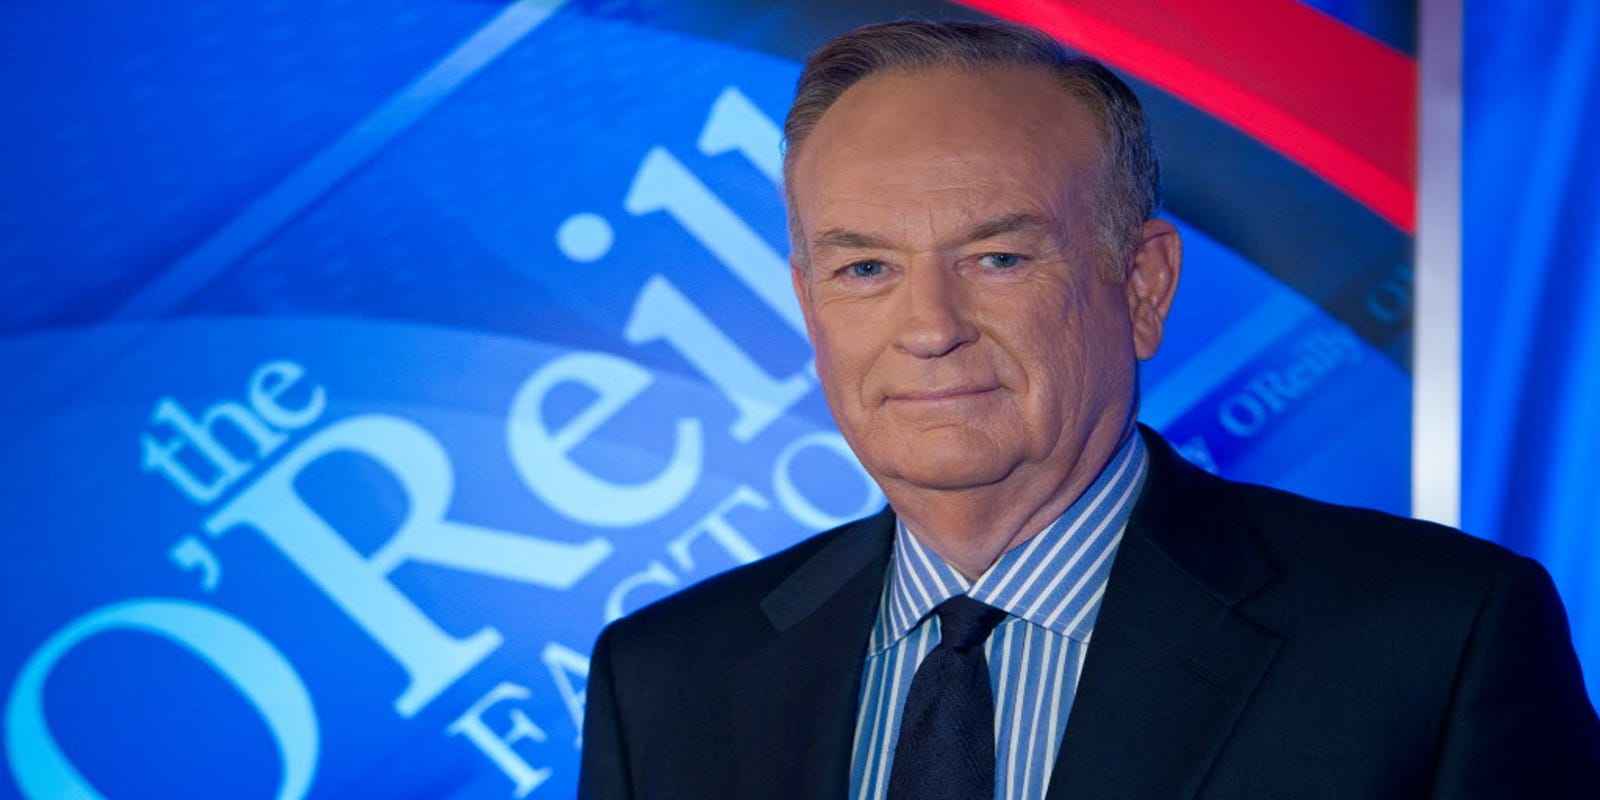 bill-o-reilly-the-truth-will-come-out-he-says-in-podcast-return